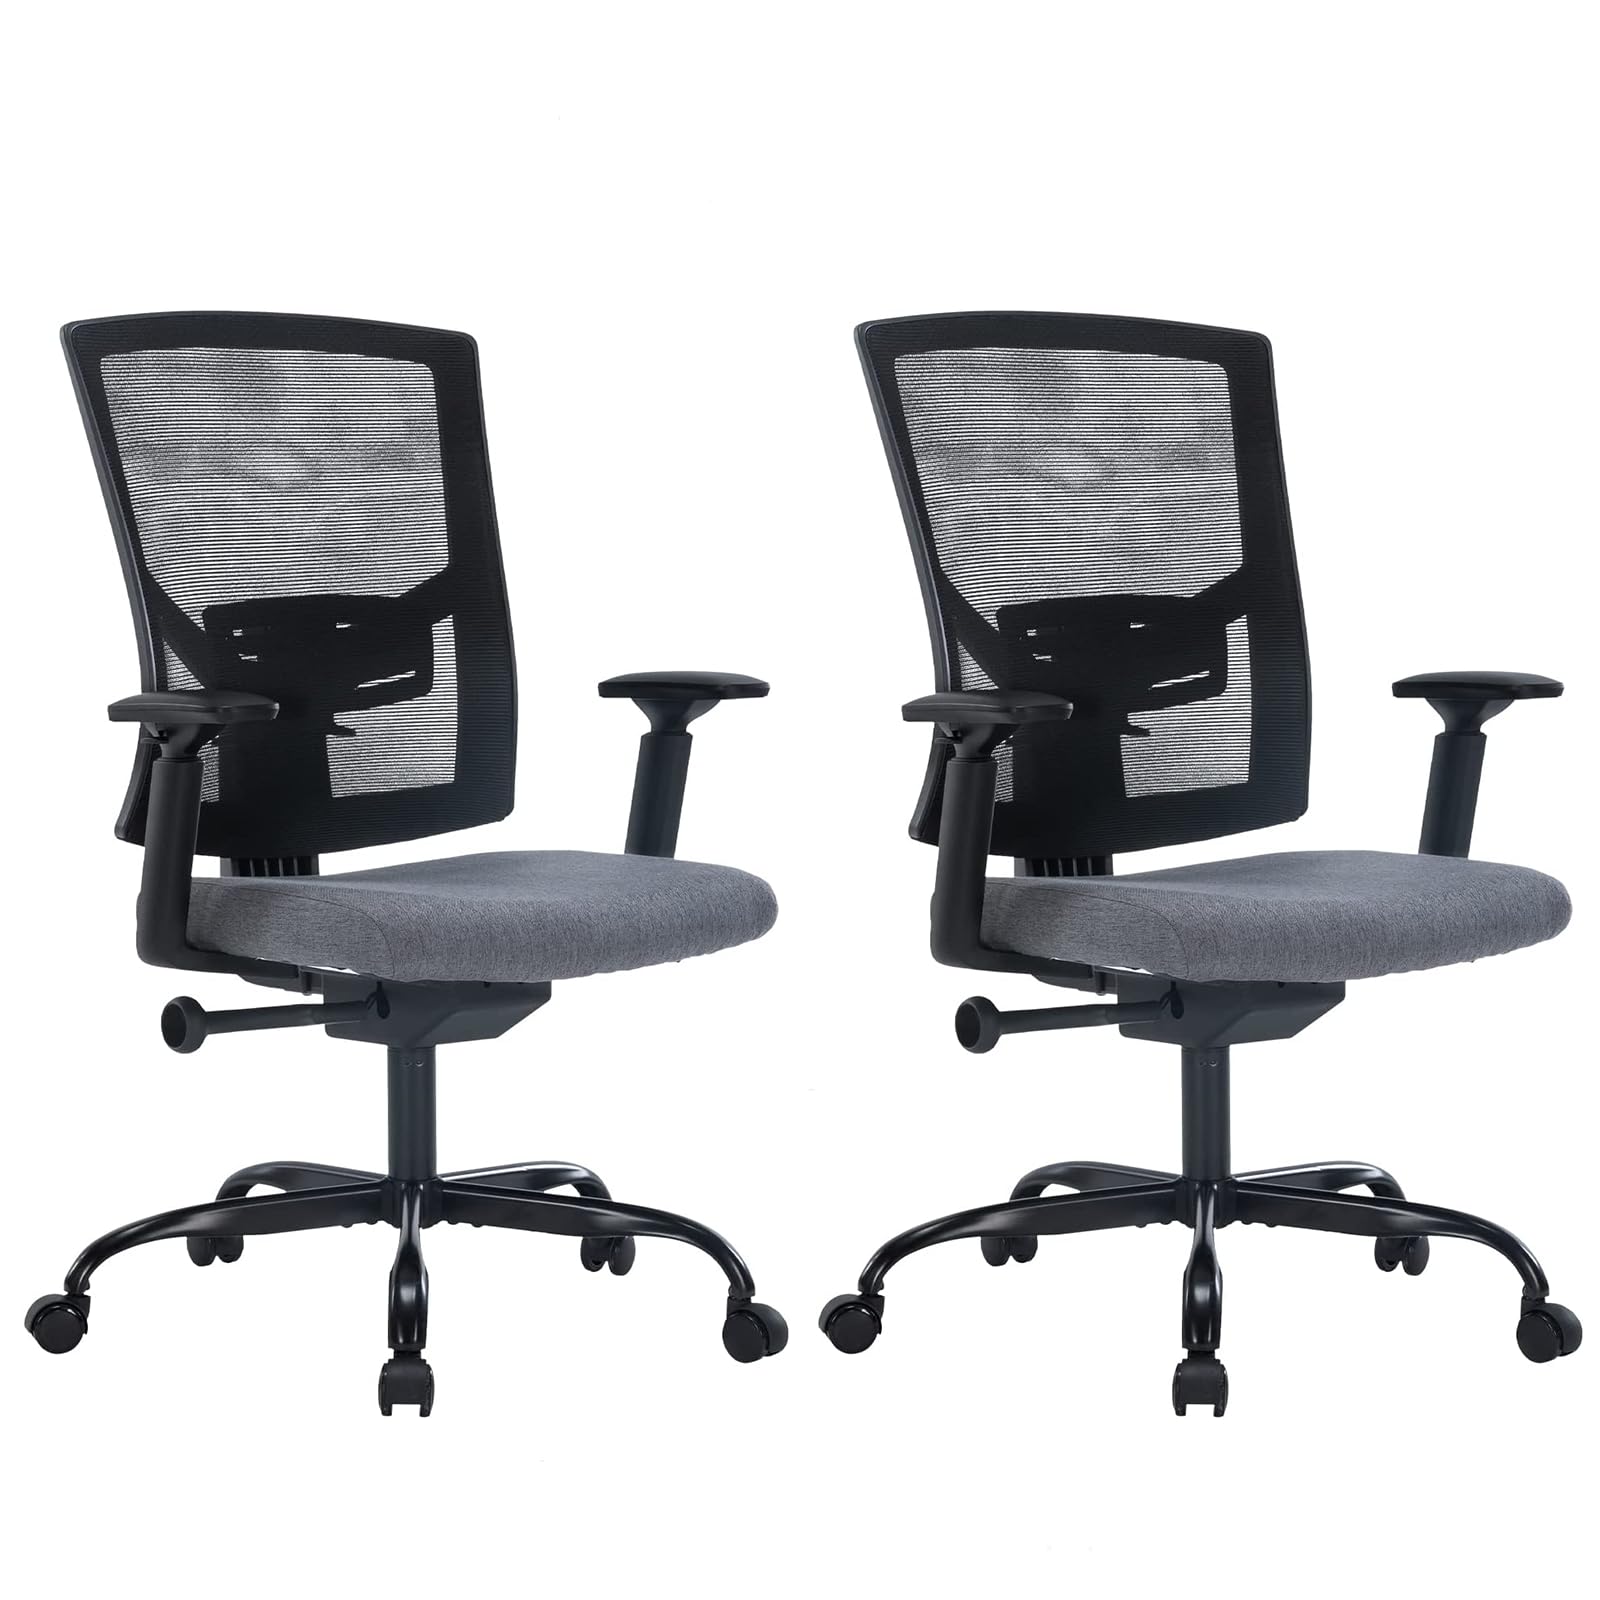 CLATINA Ergonomic Mesh Office Chair with Lumbar Support, Computer Desk Chair with Armrests and Sponge Cushion Seat for Working and Resting, Black